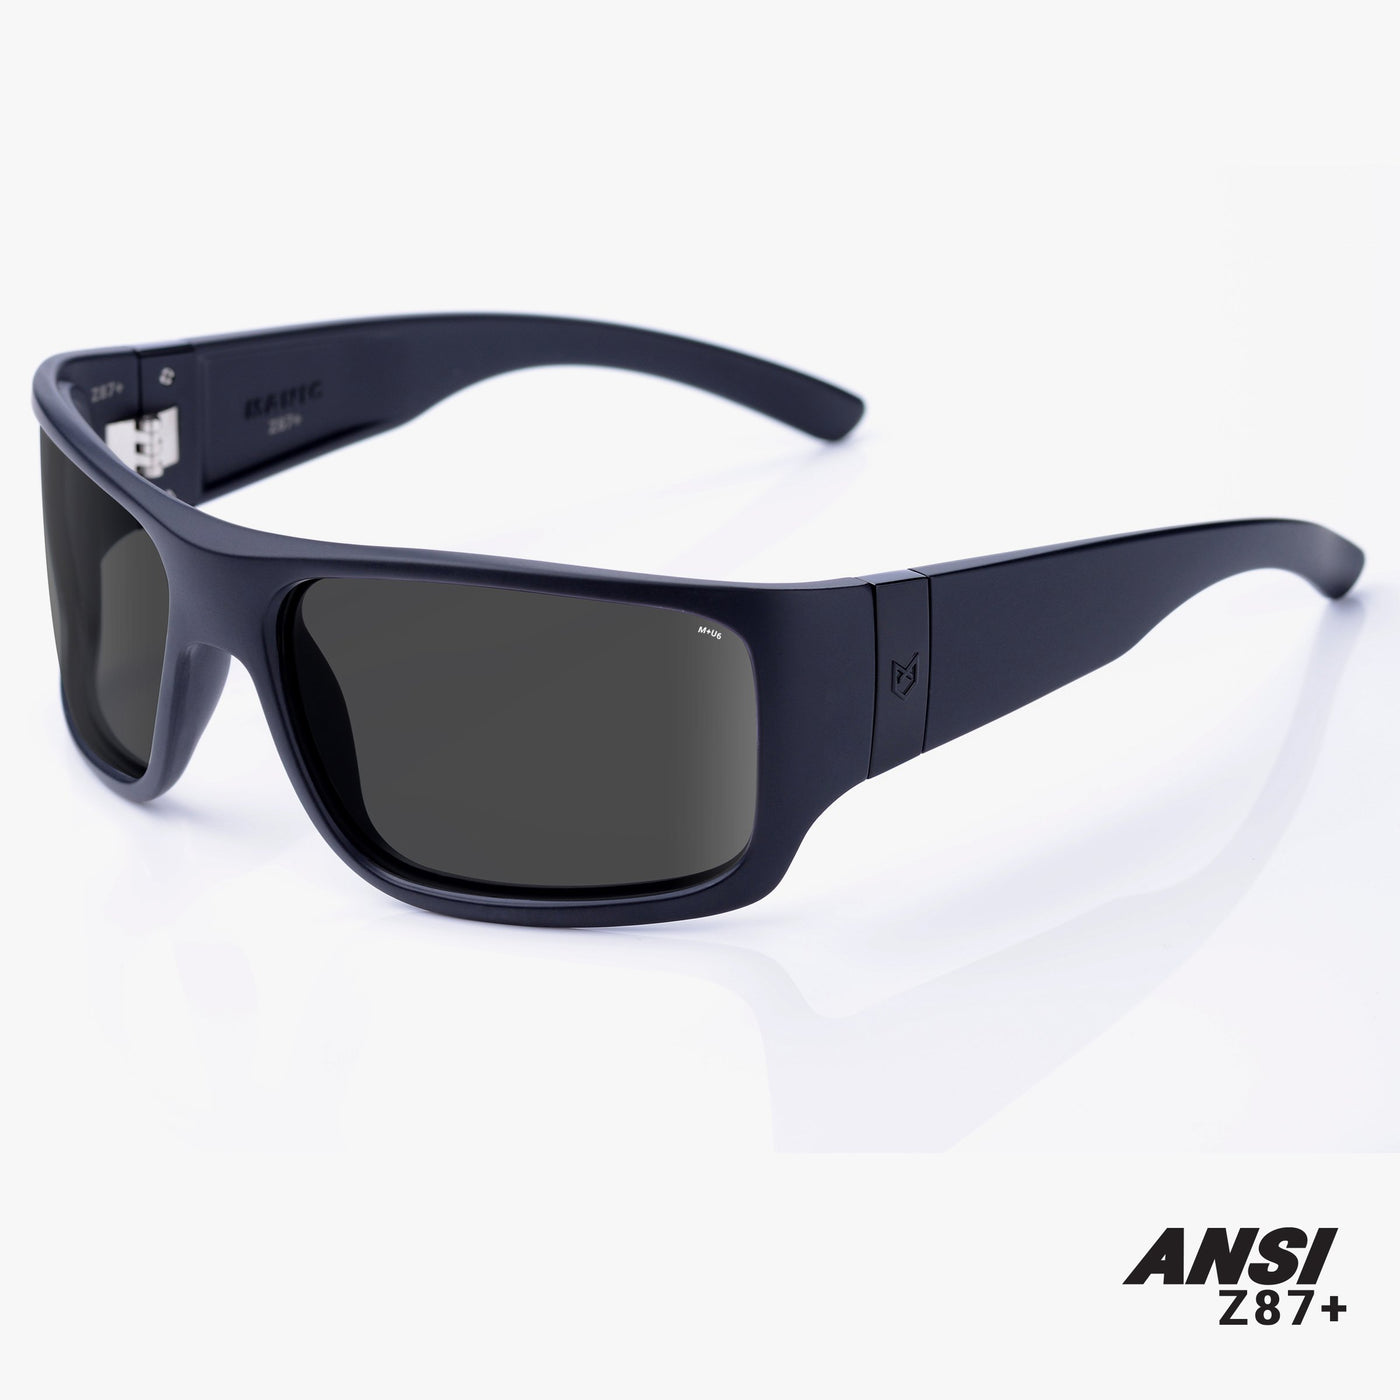 The Inferno Z87 Safety Sunglasses – Knox Incorporated